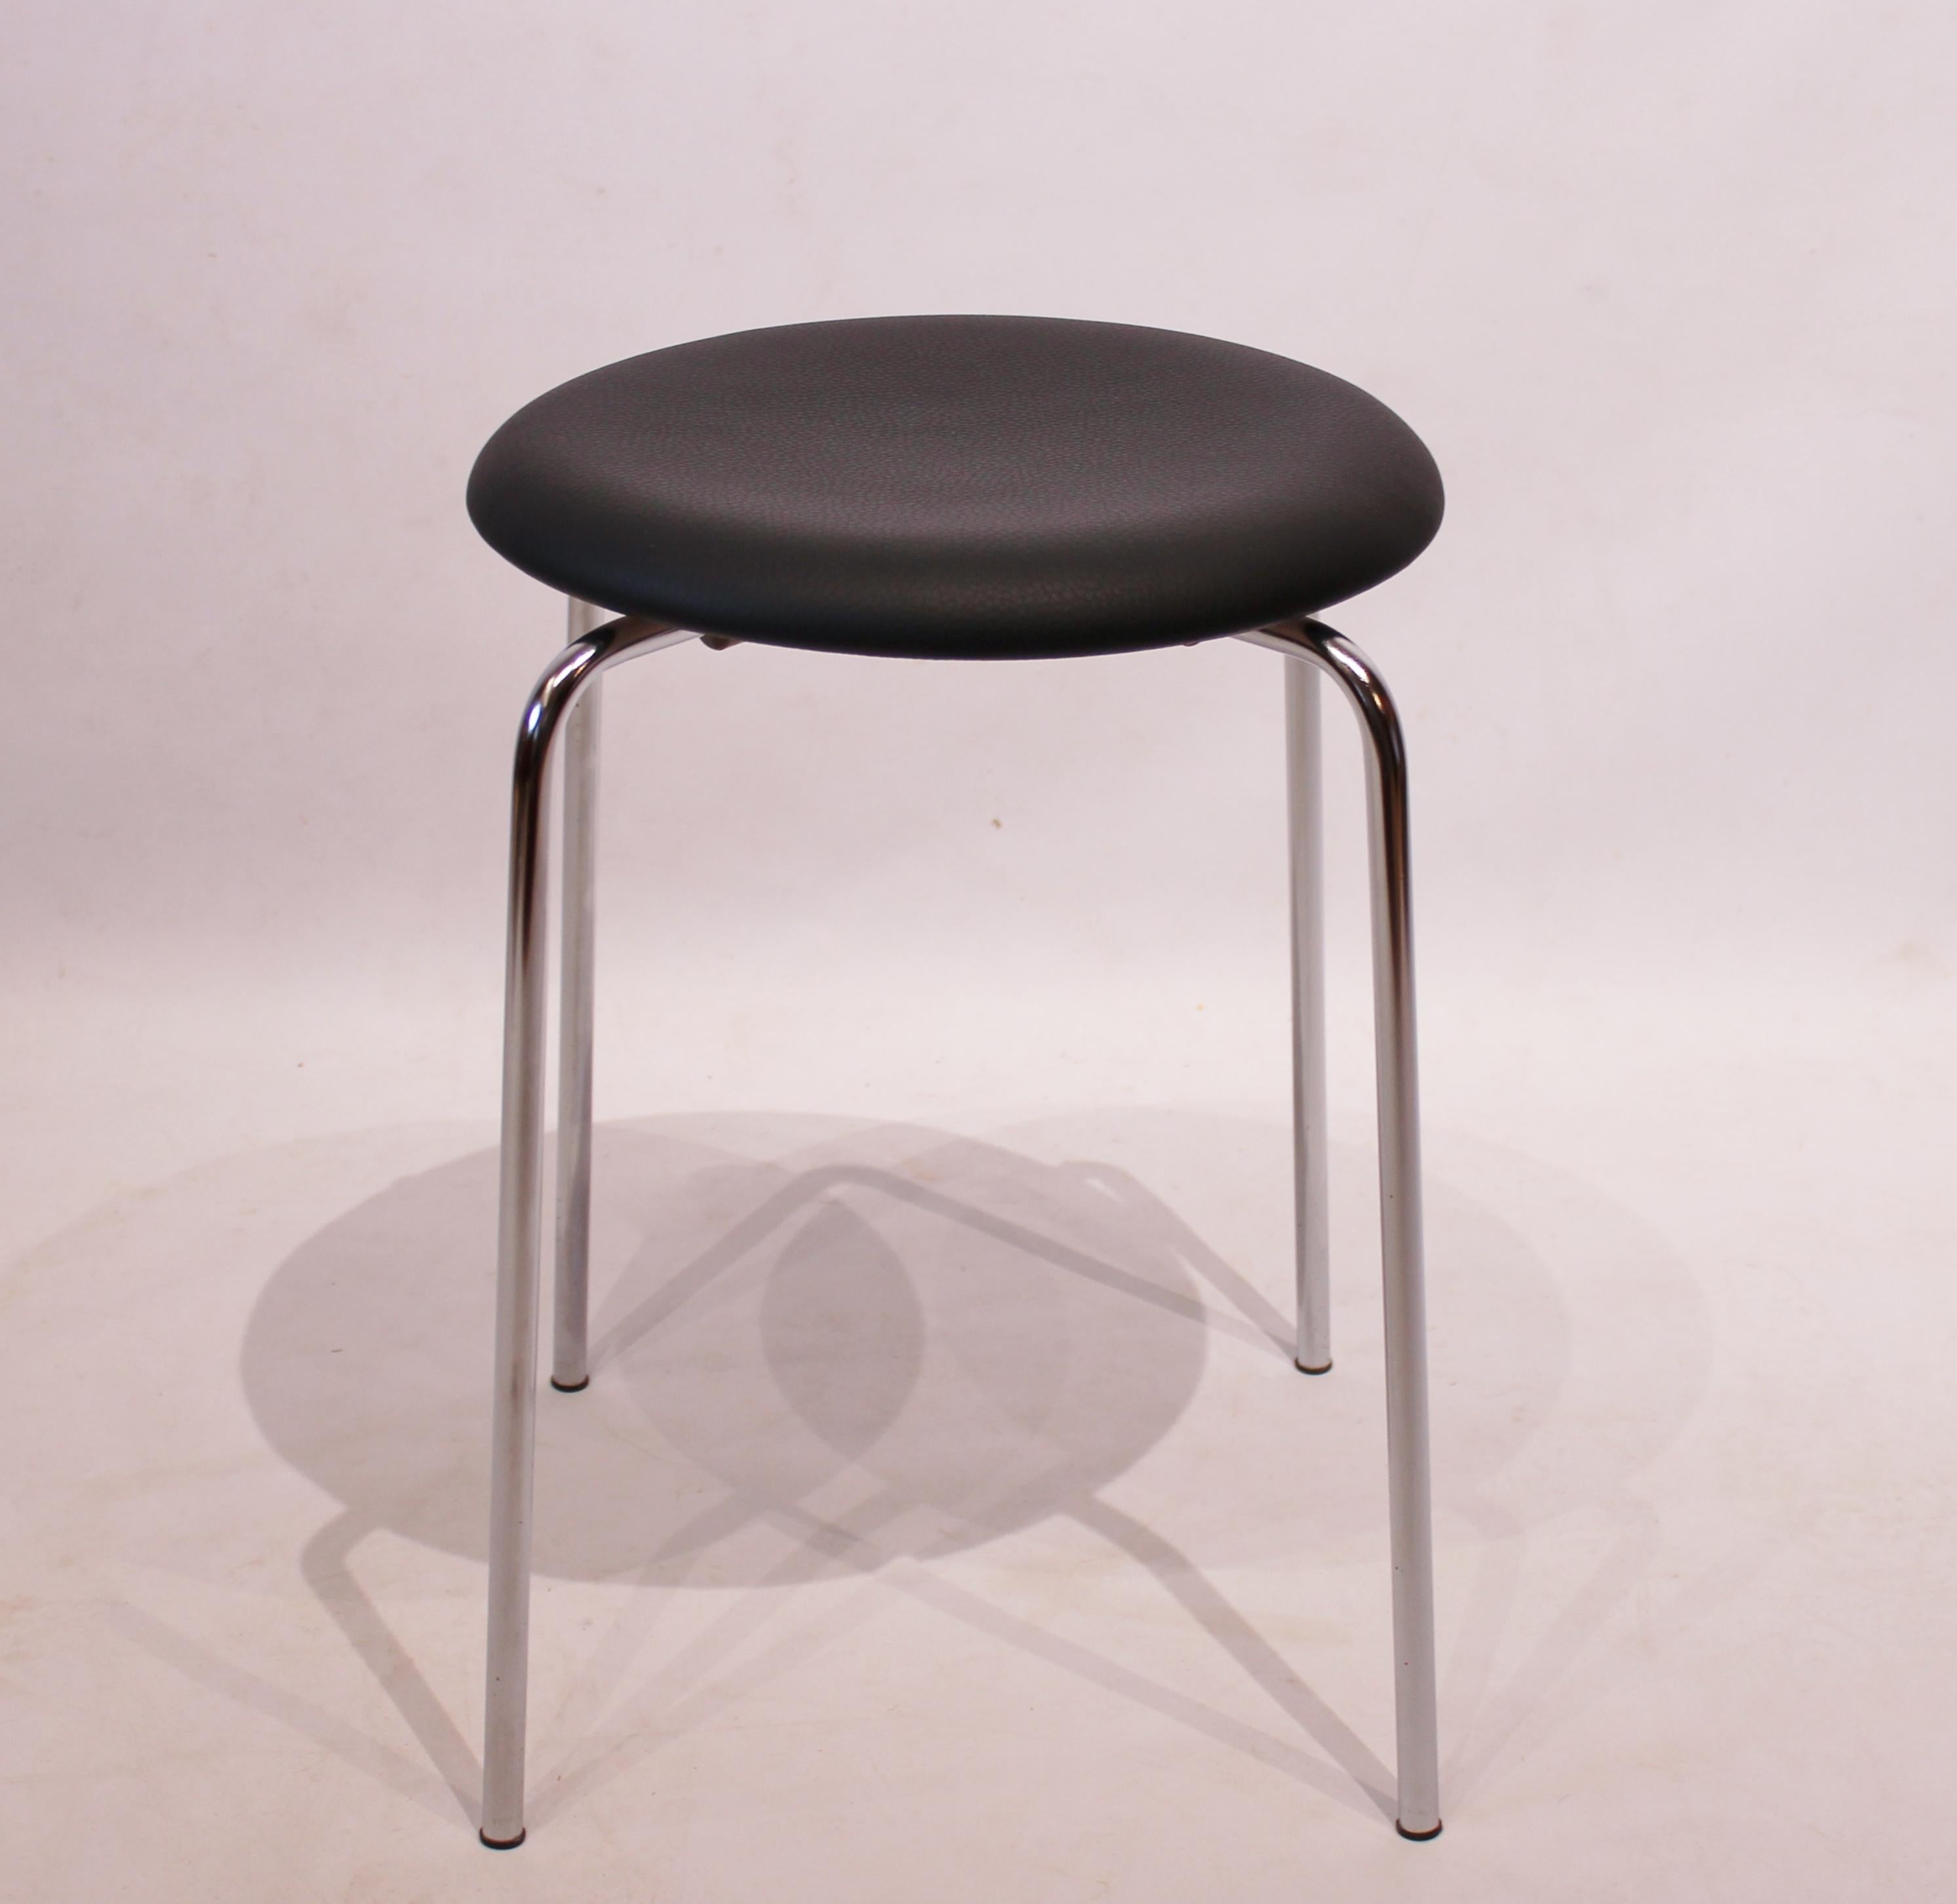 The pair of dot stools upholstered with black leather, designed by Arne Jacobsen and manufactured by Fritz Hansen in 1971, is a stylish and functional addition to any interior space.

Arne Jacobsen was a Danish architect and designer known for his